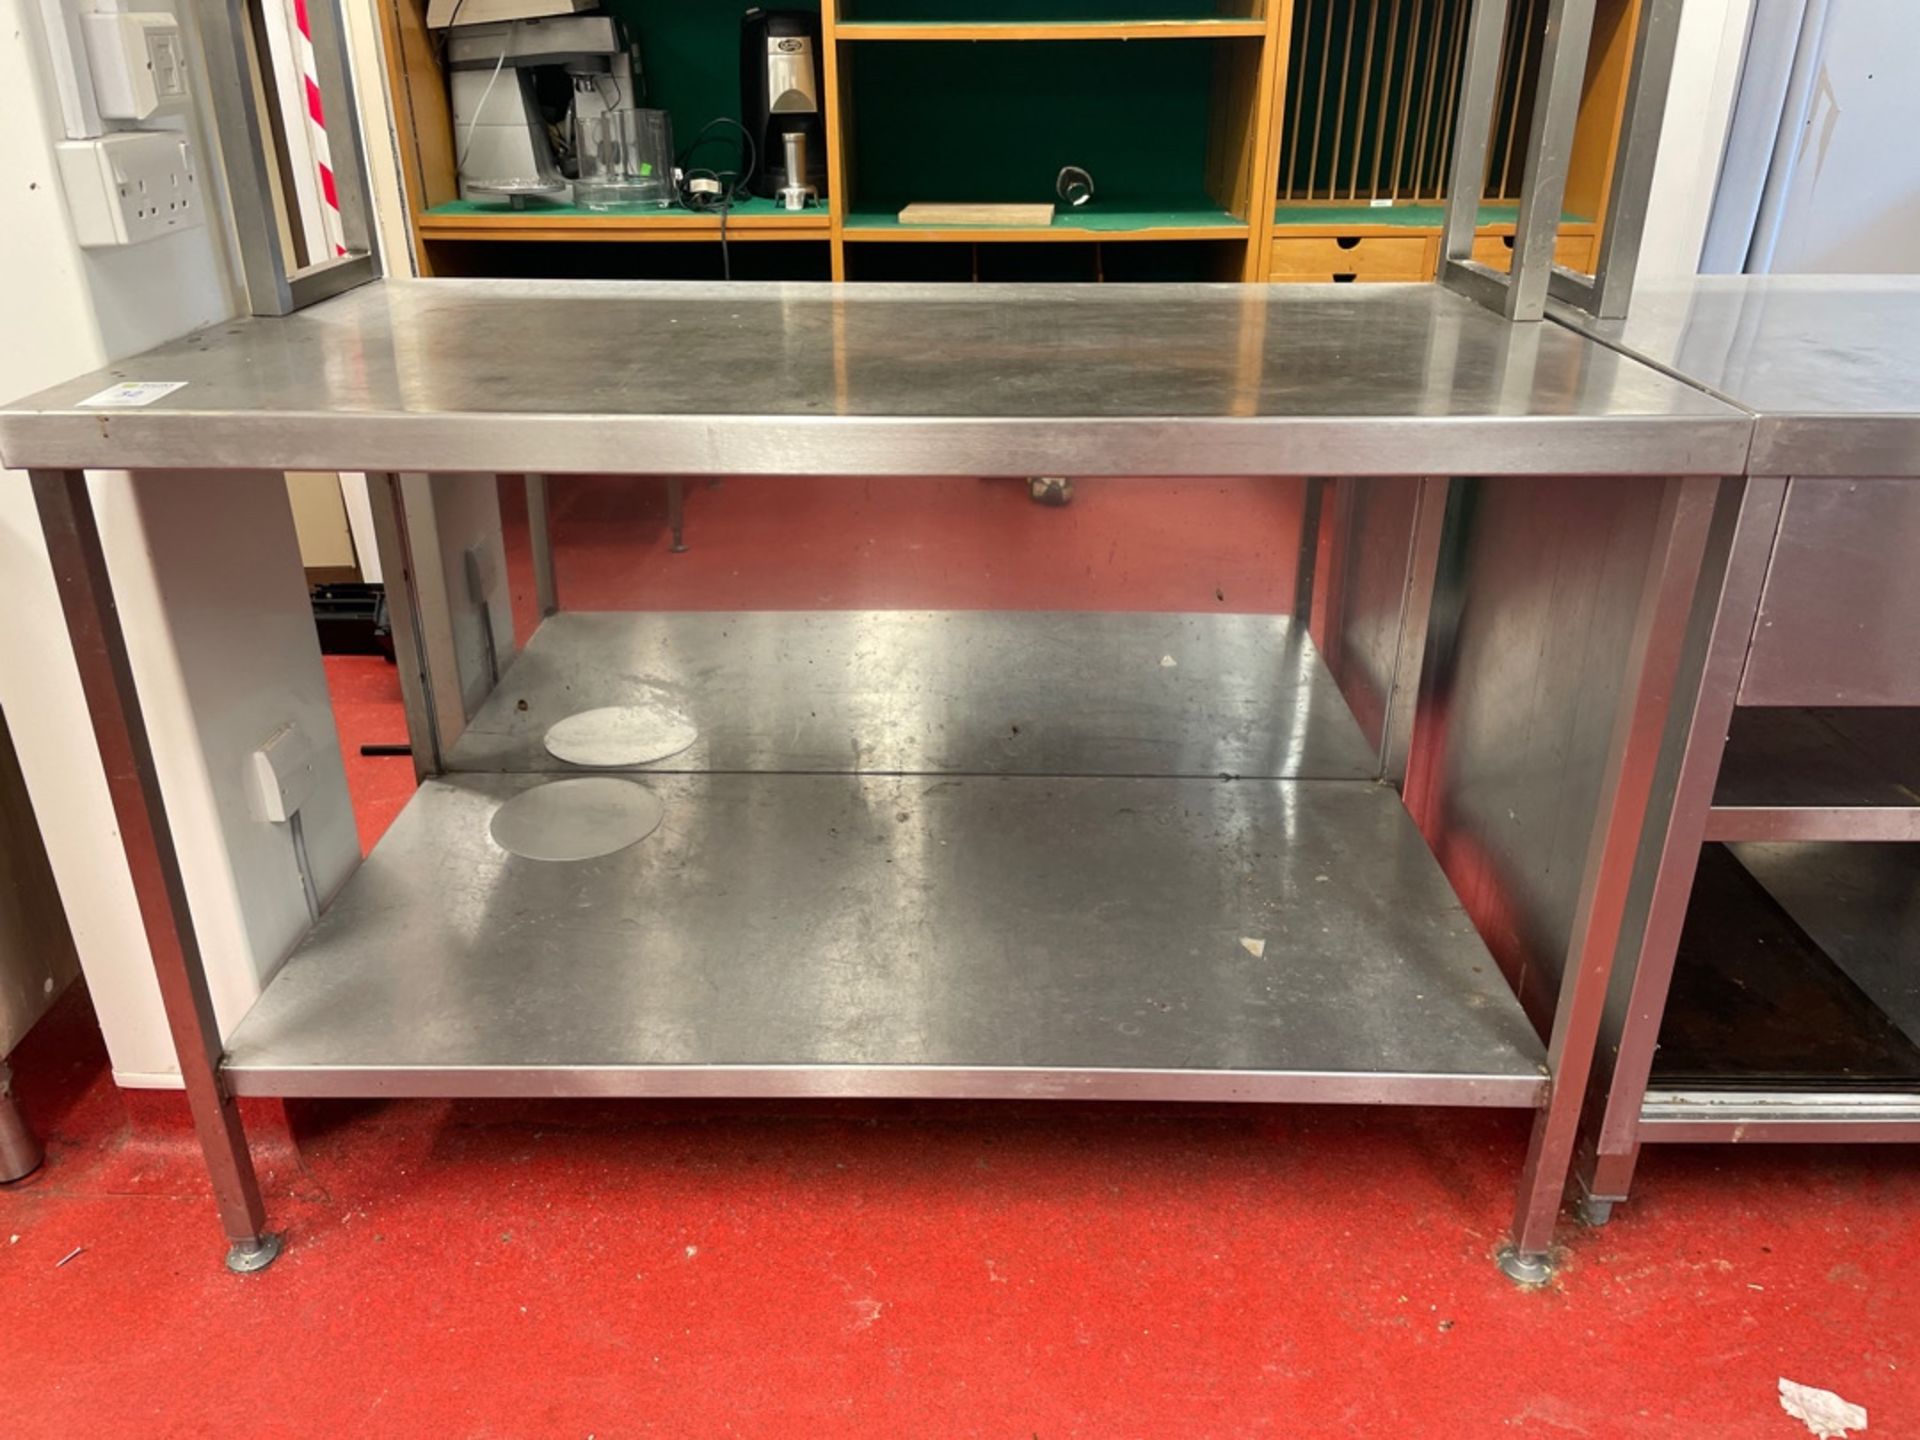 Stainless Steel Prep Station - Image 2 of 3